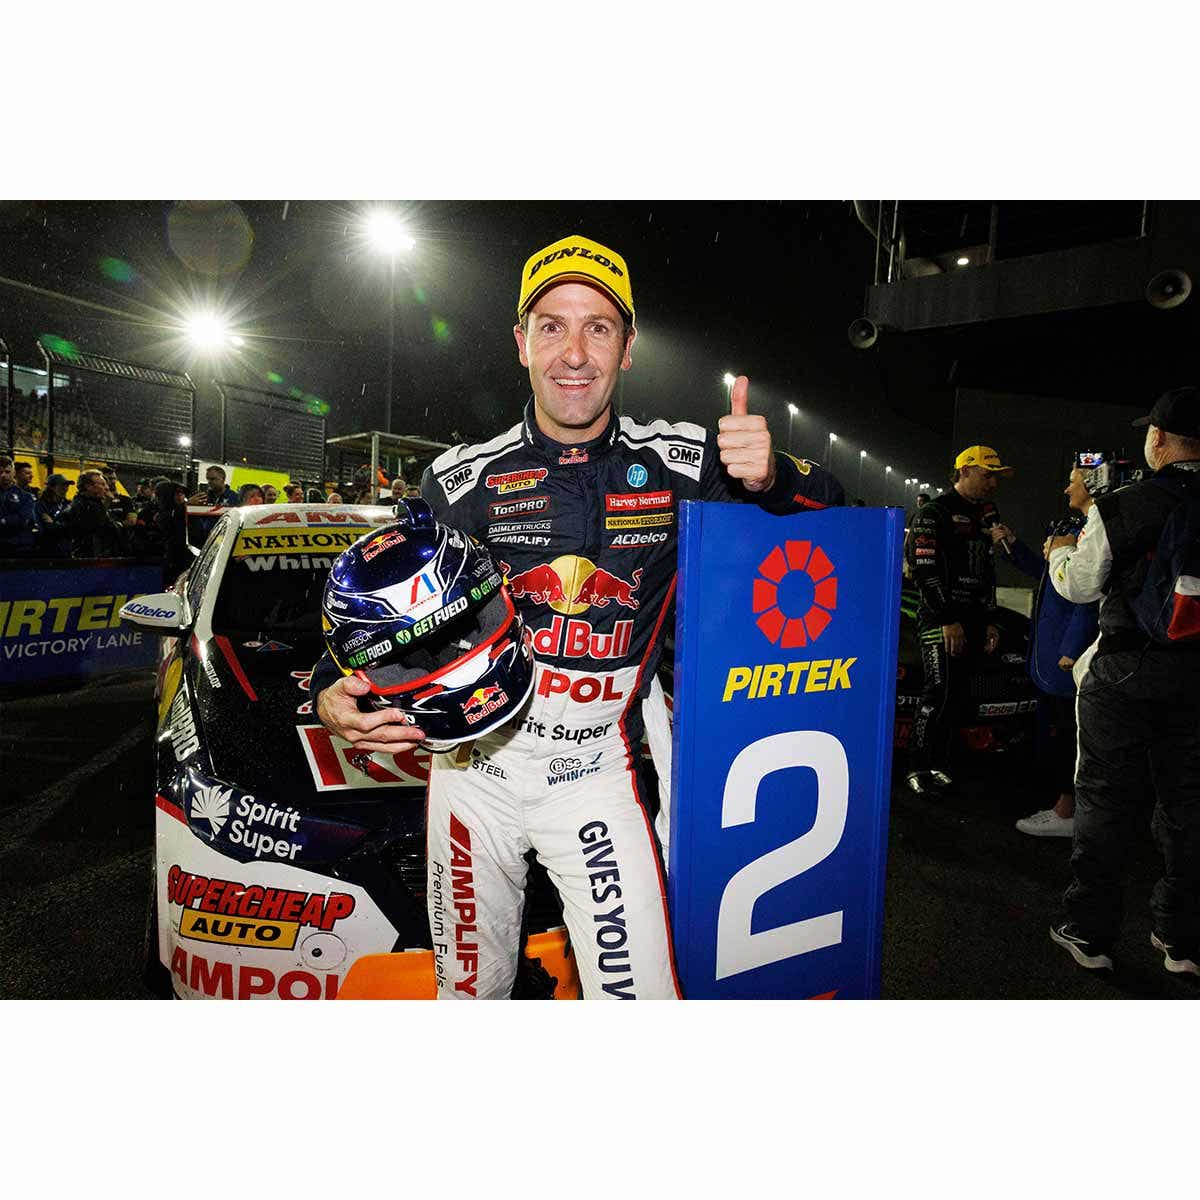 HOLDEN ZB COMMODORE - RED BULL AMPOL RACING #88 - JAMIE WHINCUP - BEAUREPAIRS SYDNEY SUPERNIGHT RACE 29 - LAST FULL-TIME SOLO DRIVE - 1:18 Scale Diecast Model Car